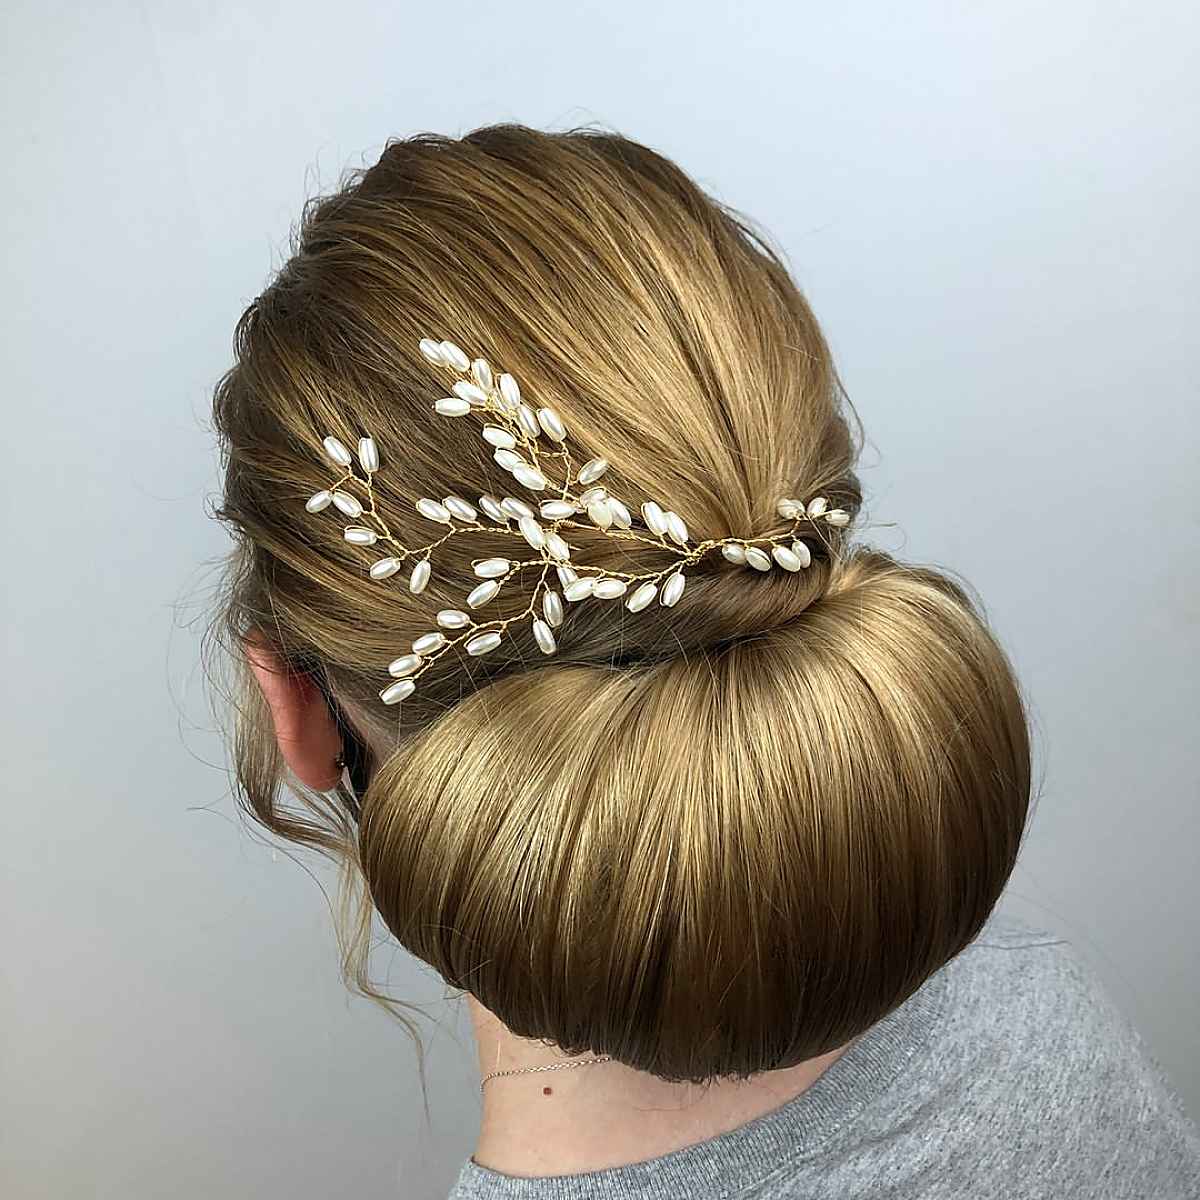 Full Chignon with a Pearl Hair Vine